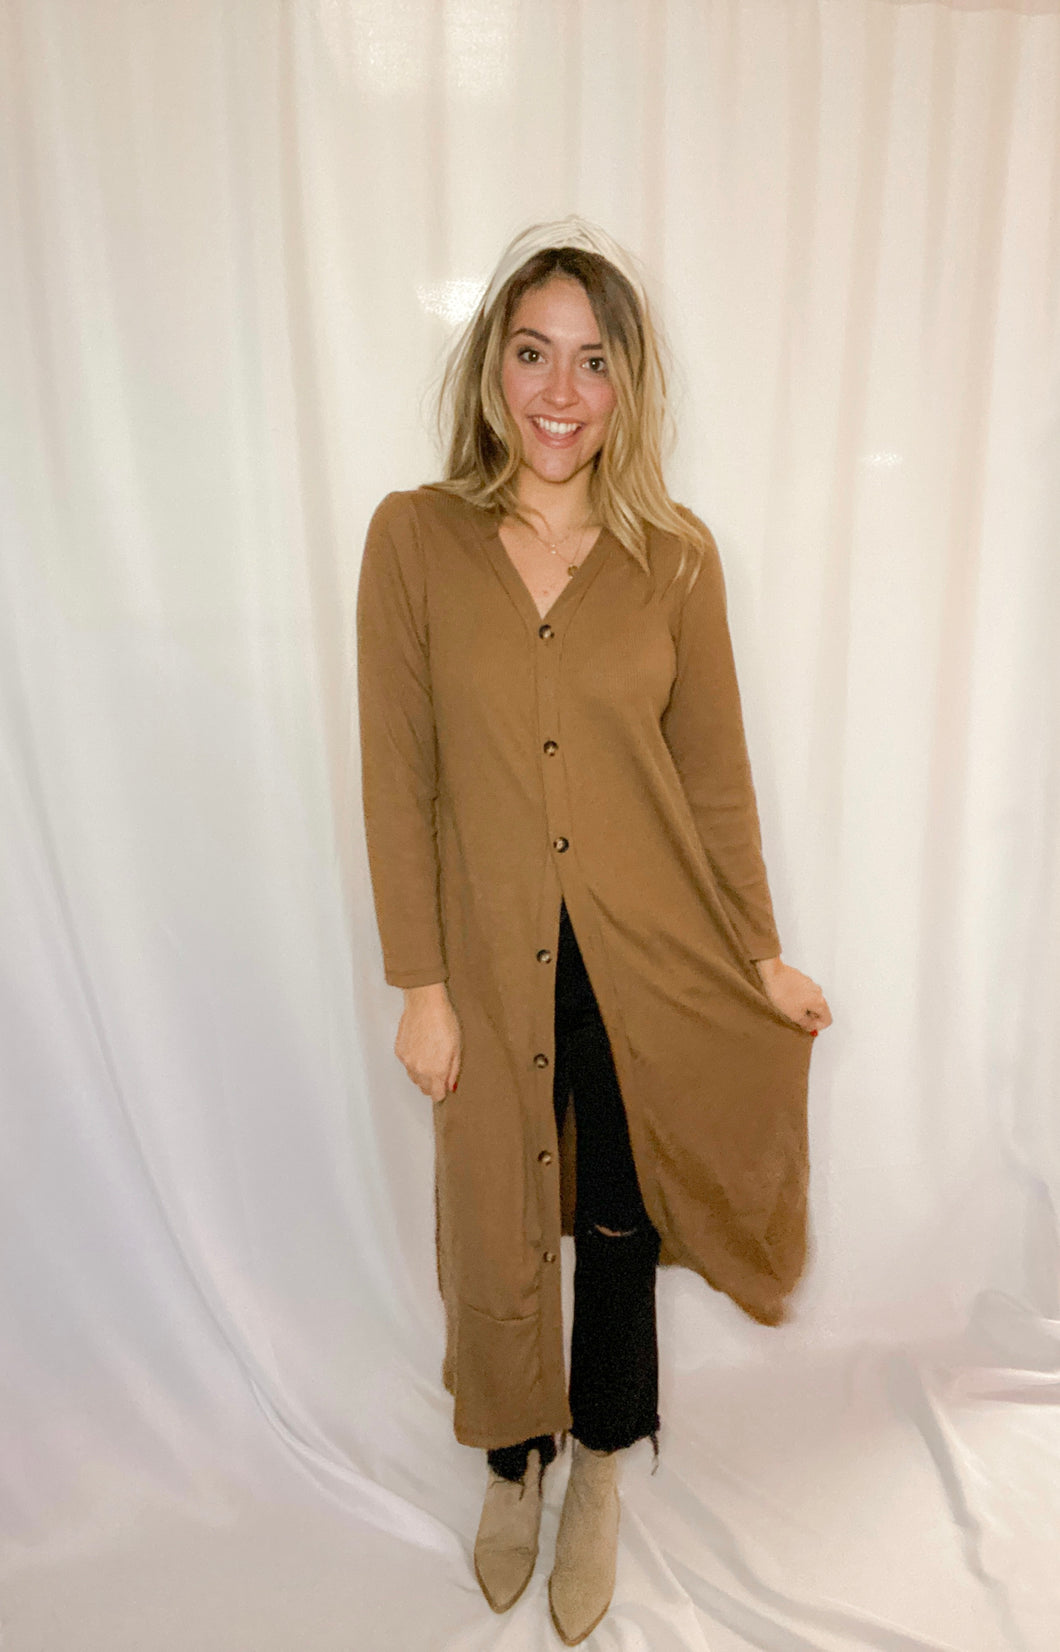 The Fawn Duster Cardigan